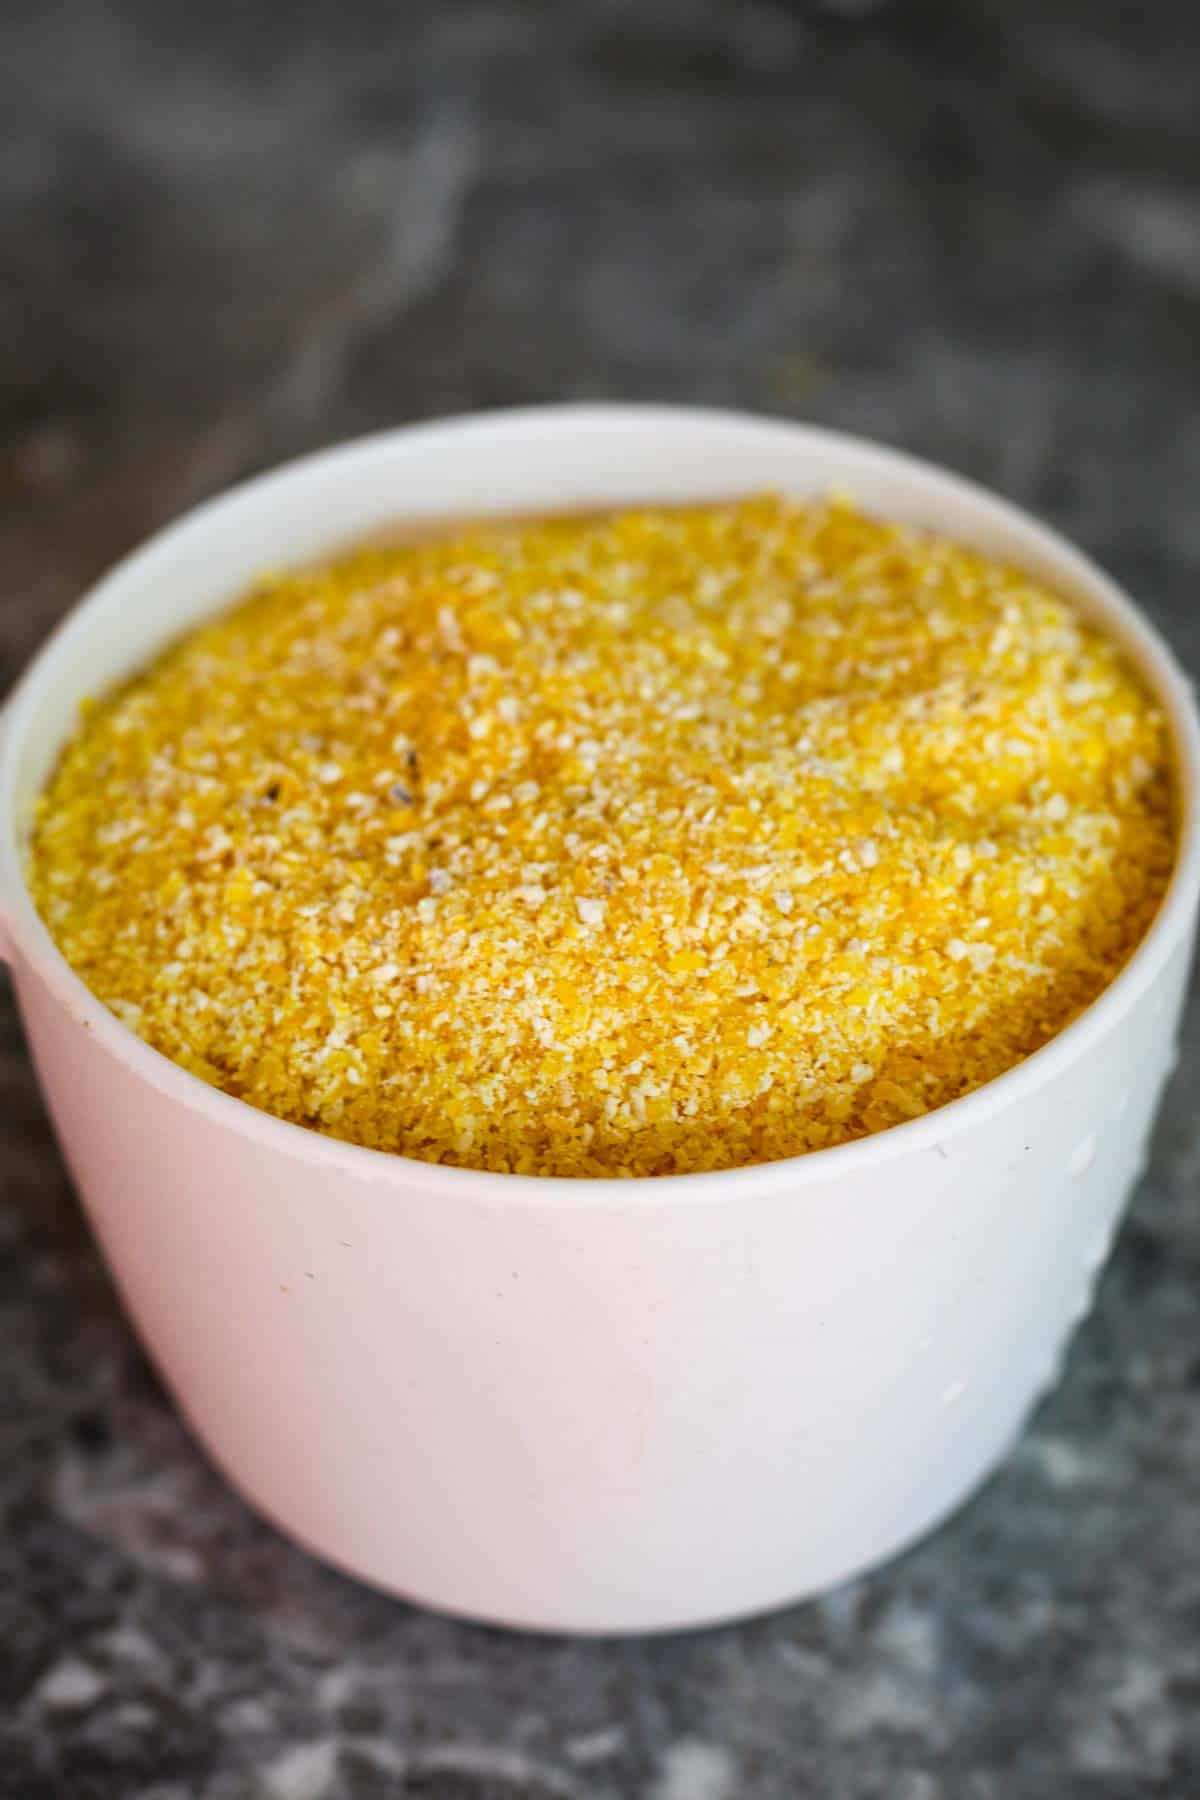 A cup of uncooked polenta, you can see the coarse yellow grains.